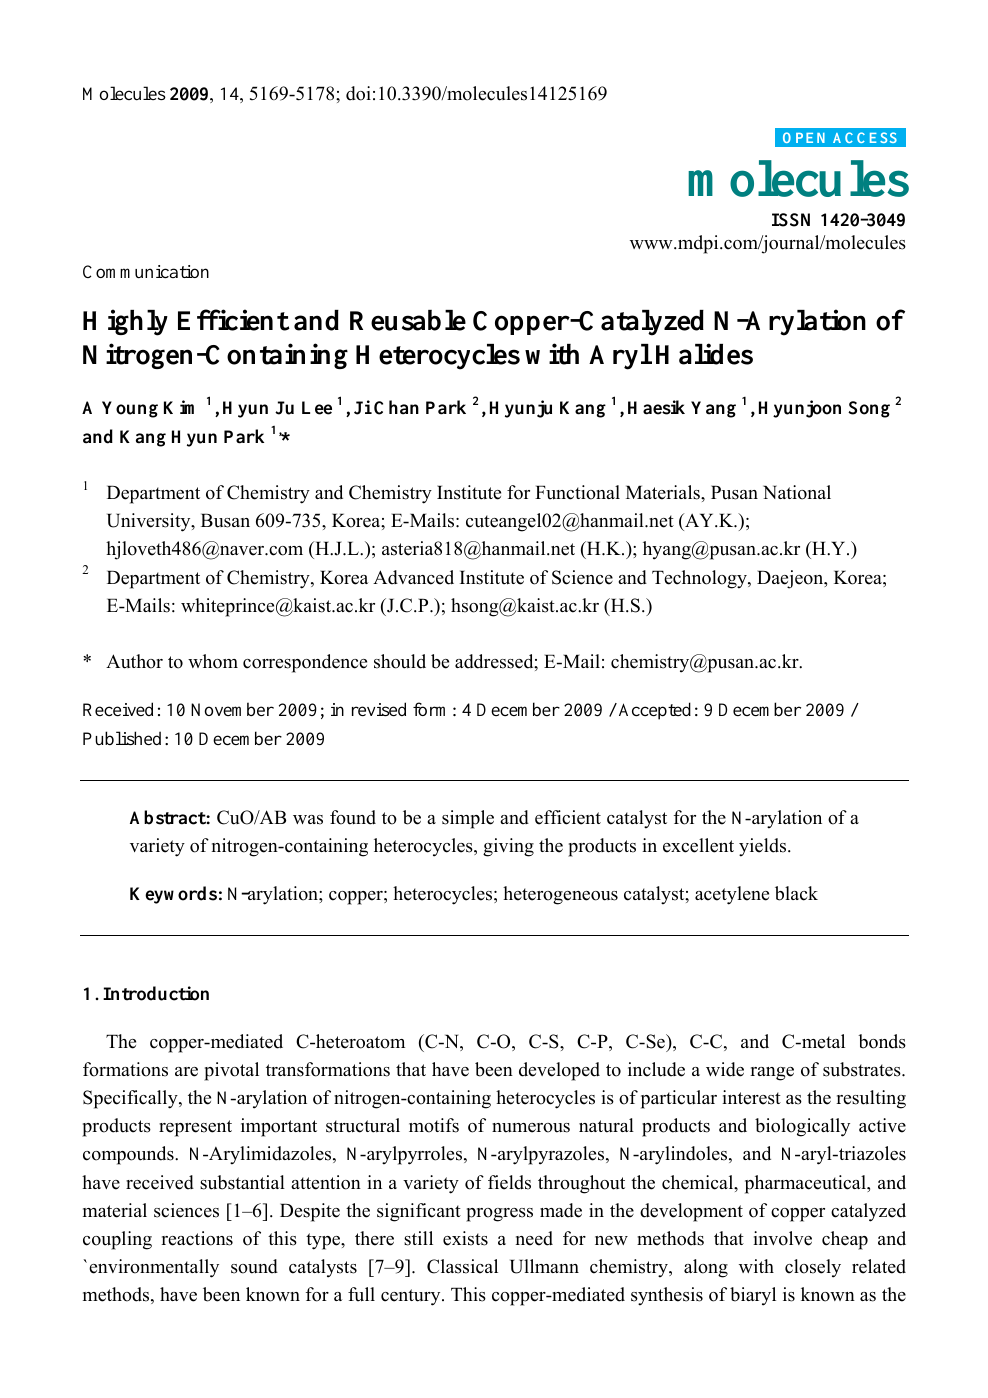 Highly Efficient And Reusable Copper Catalyzed N Arylation Of Nitrogen Containing Heterocycles With Aryl Halides Topic Of Research Paper In Chemical Sciences Download Scholarly Article Pdf And Read For Free On Cyberleninka Open Science